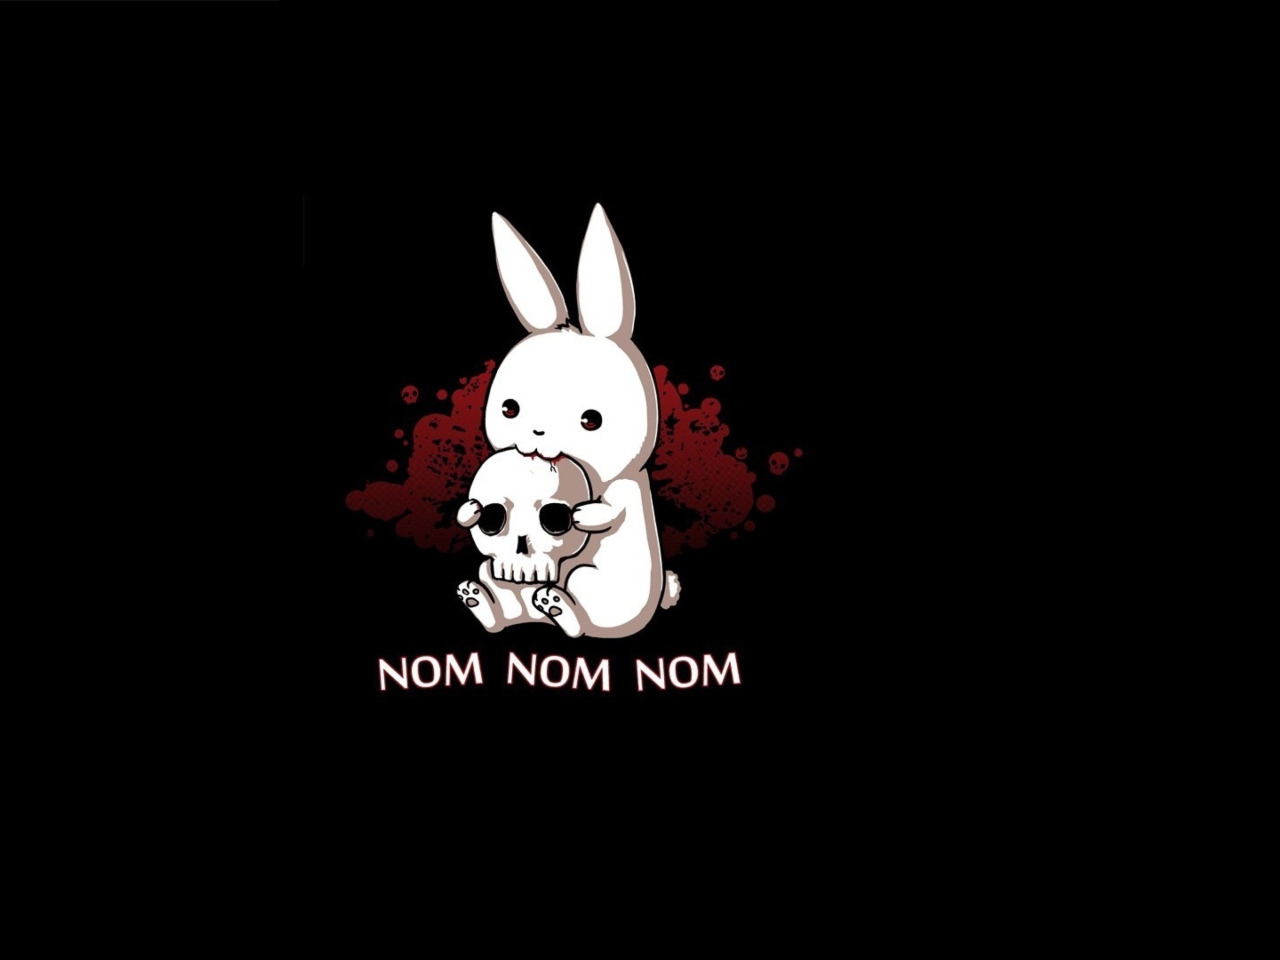 Blood-Thirsty Hare wallpaper 1280x960